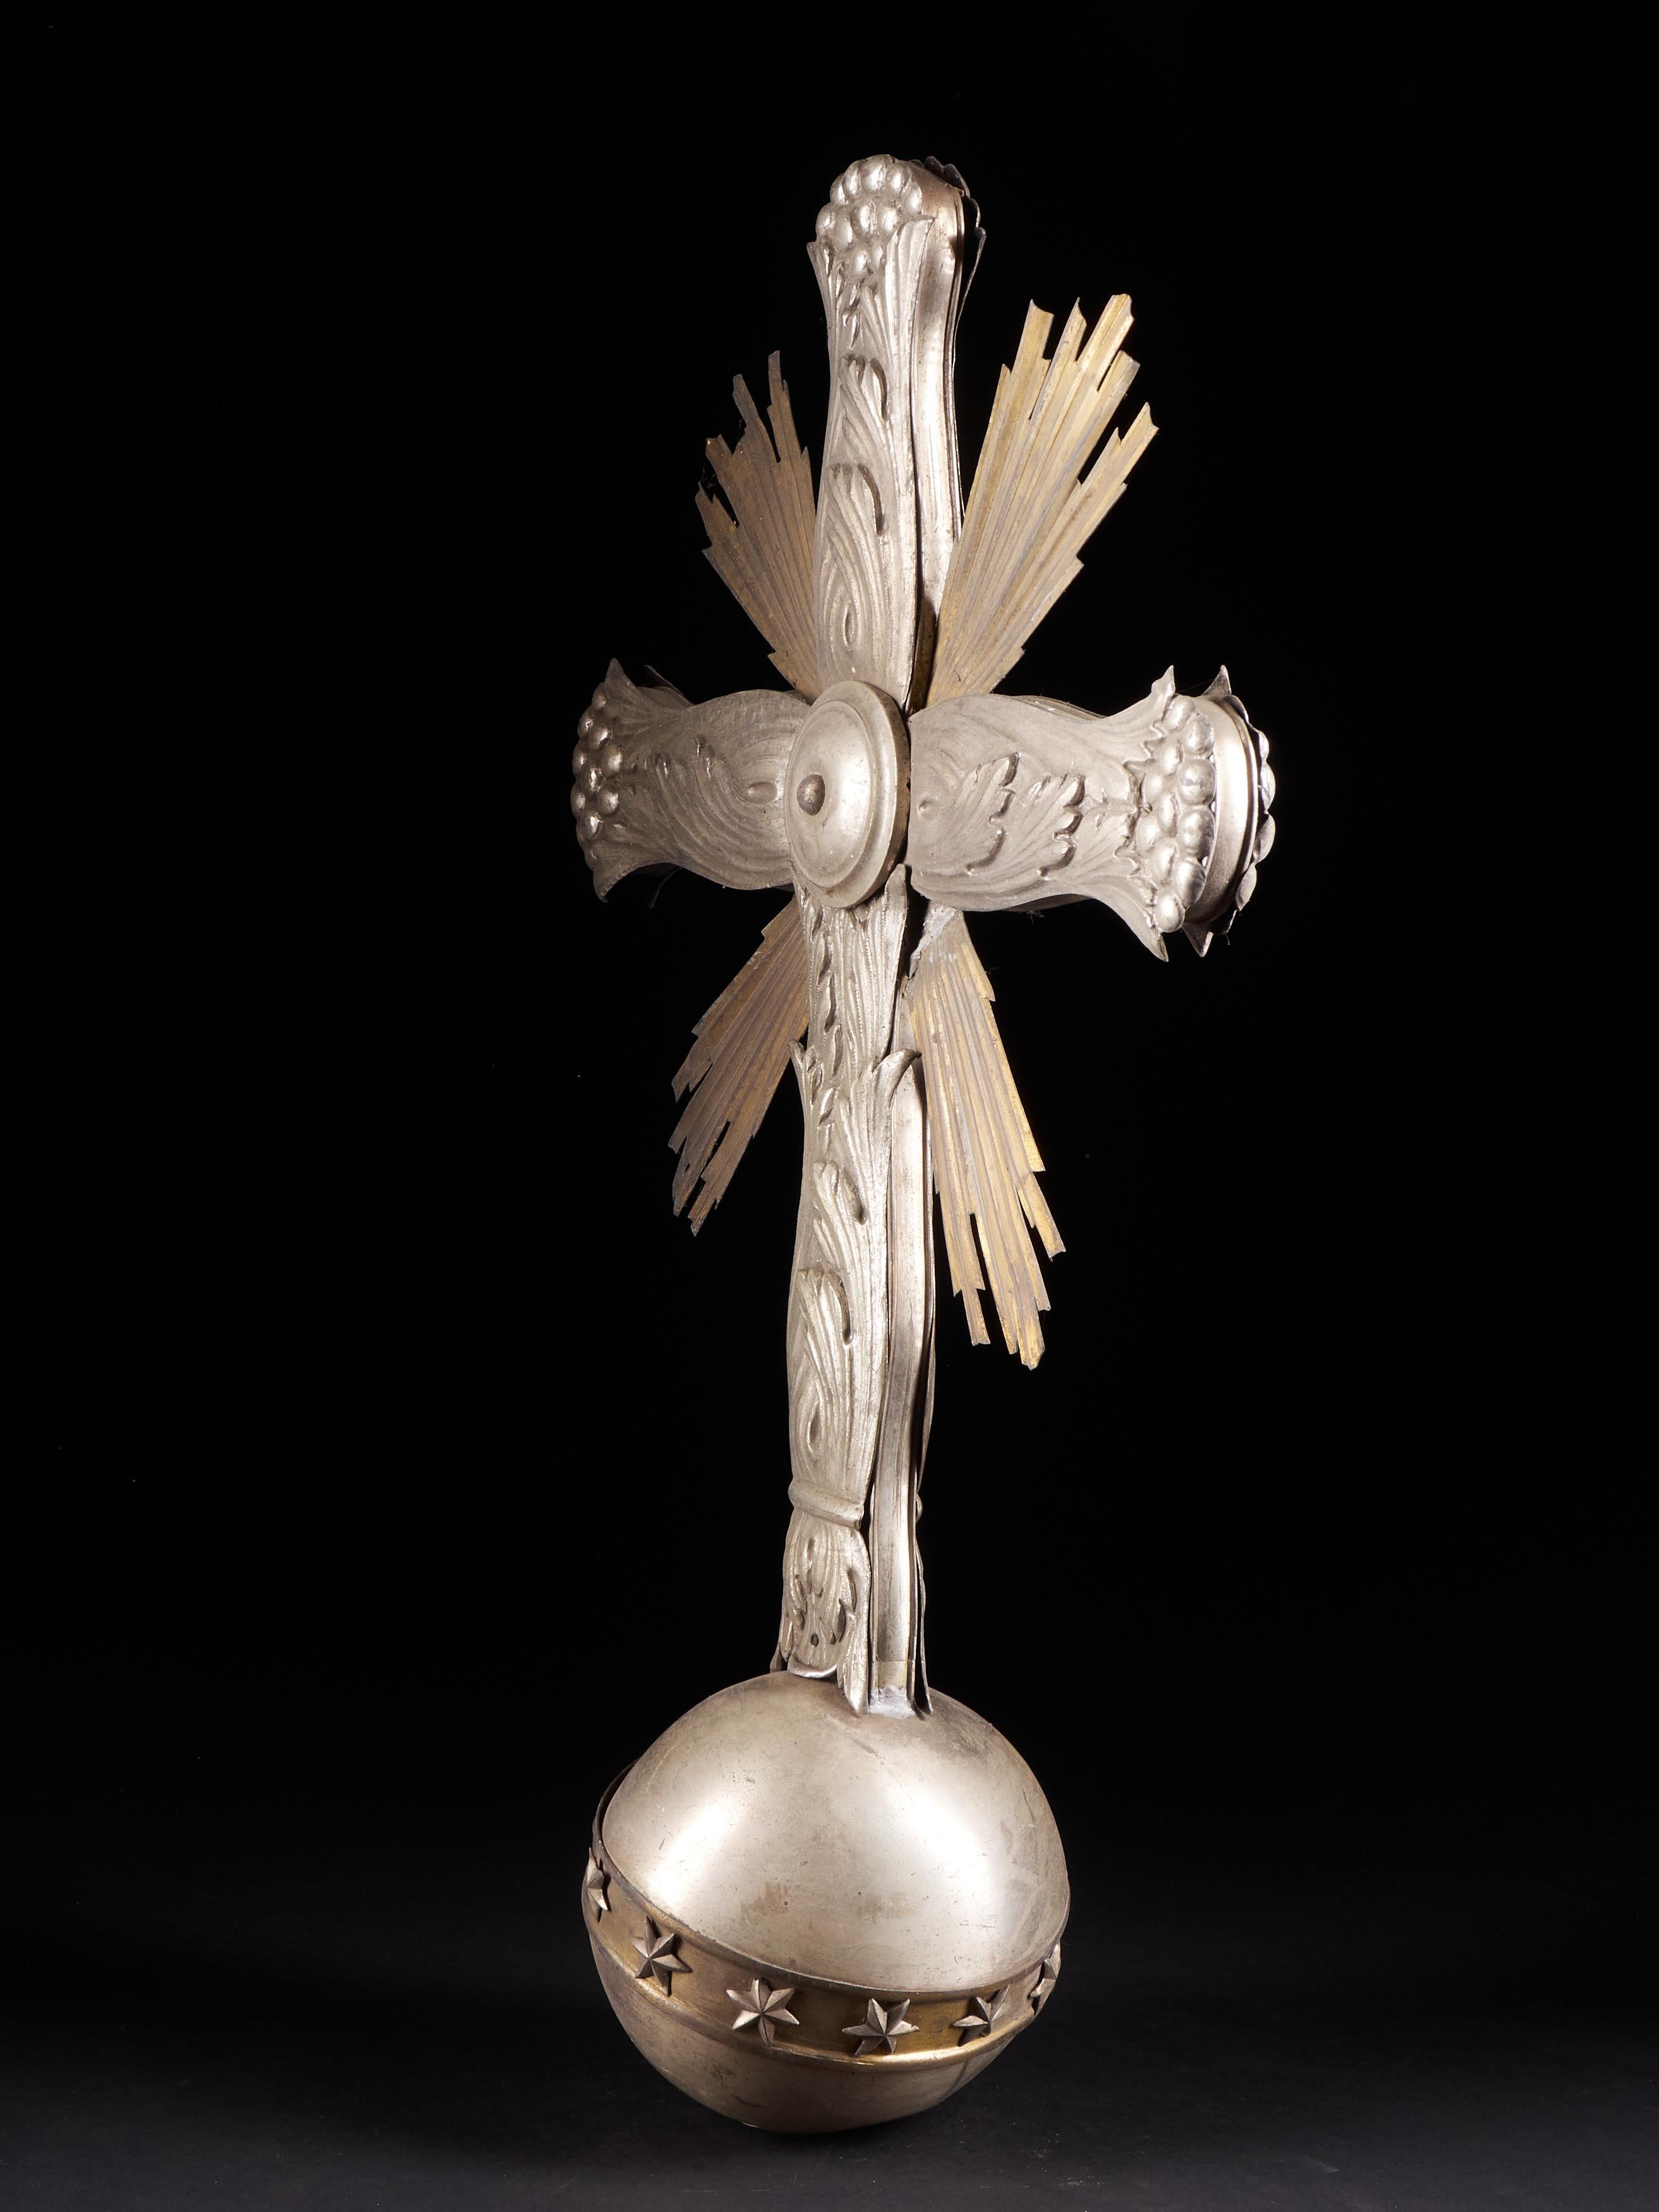 Belgian Light and Elaborately Decorated Antique Metal Cross on a Bowl